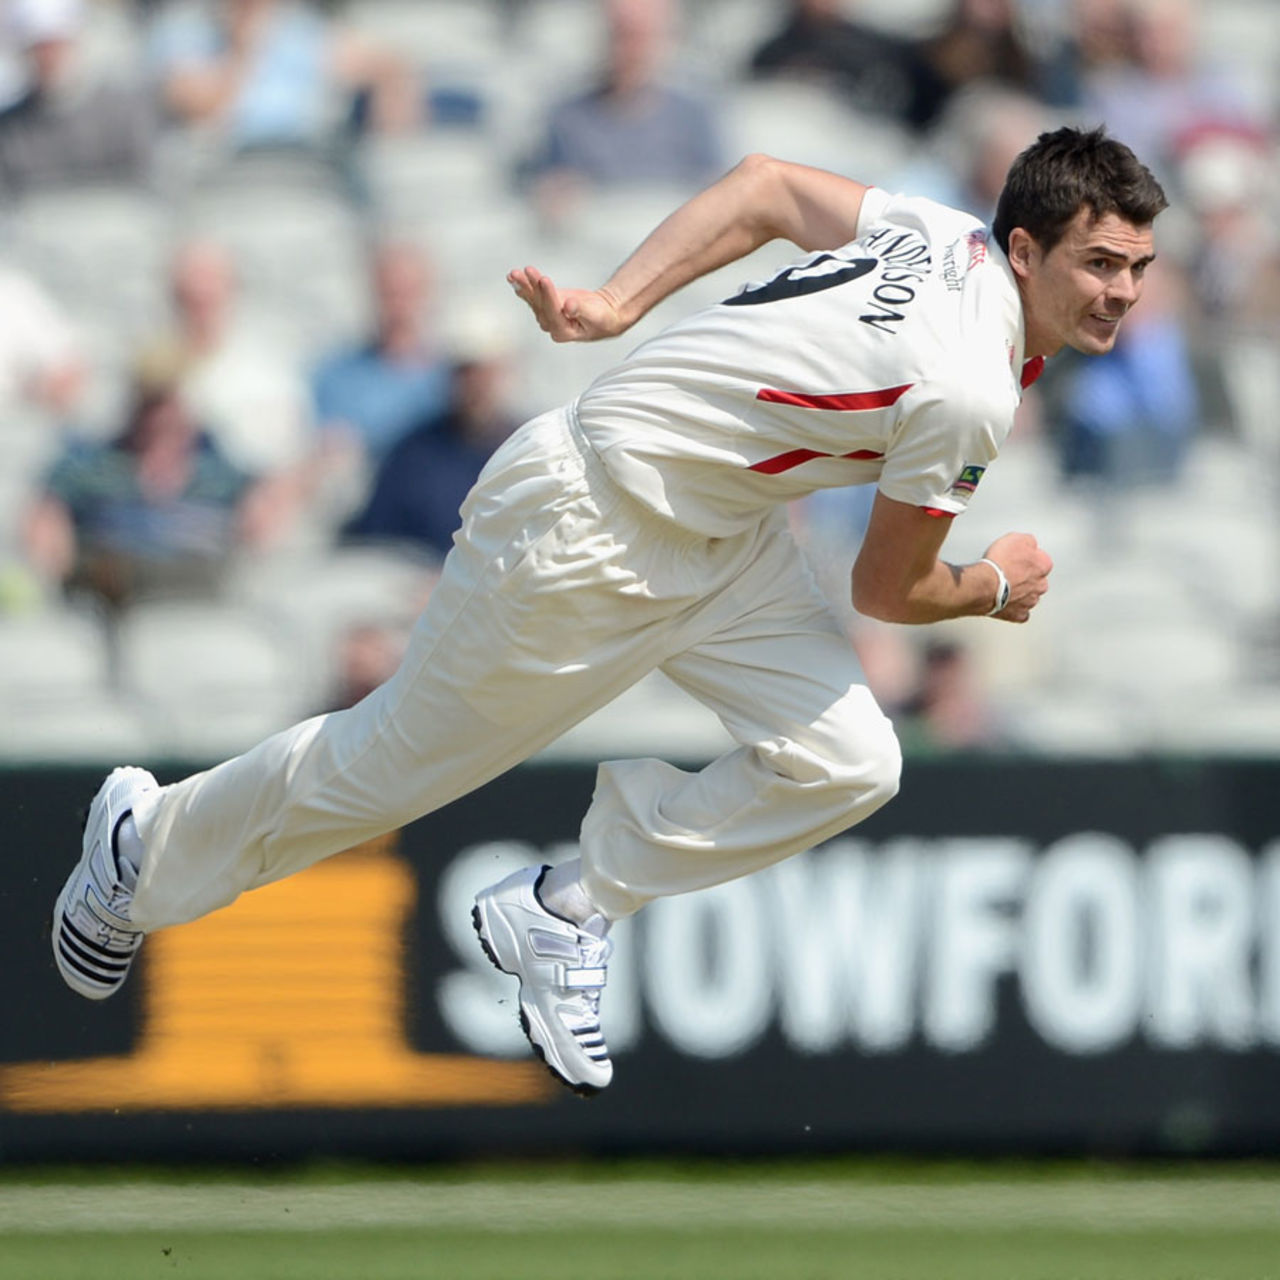 James Anderson follows through after delivering the ball, Lancashire v Nottinghamshire, County Championship, Division One, Old Trafford, 1st day, May 2, 2012